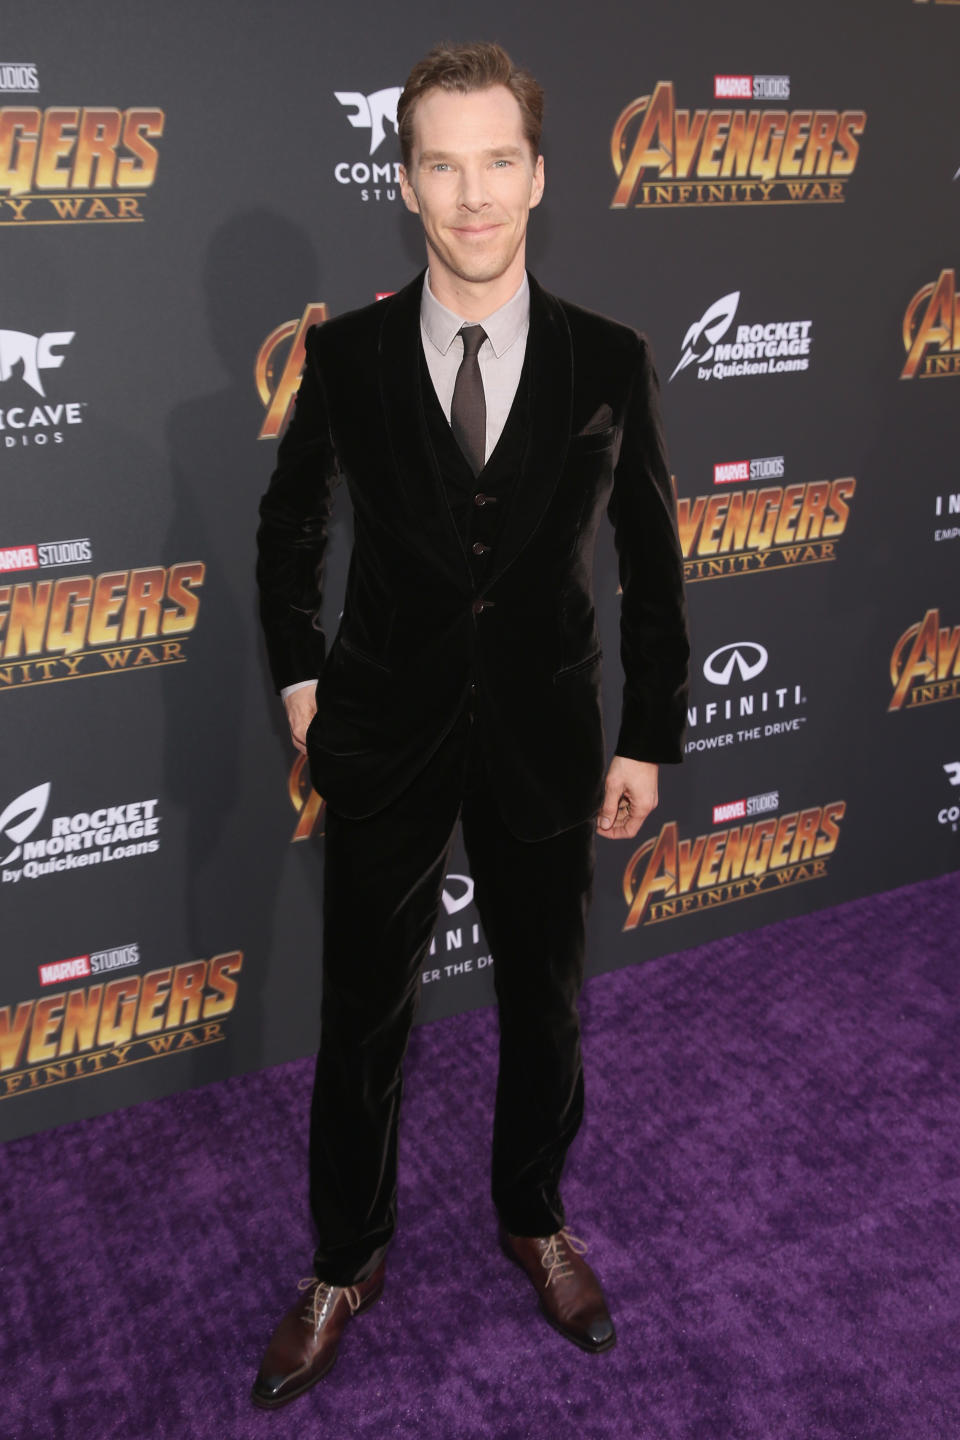 Benedict Cumberbatch at the L.A. premiere of ‘Avengers: Infinity War’